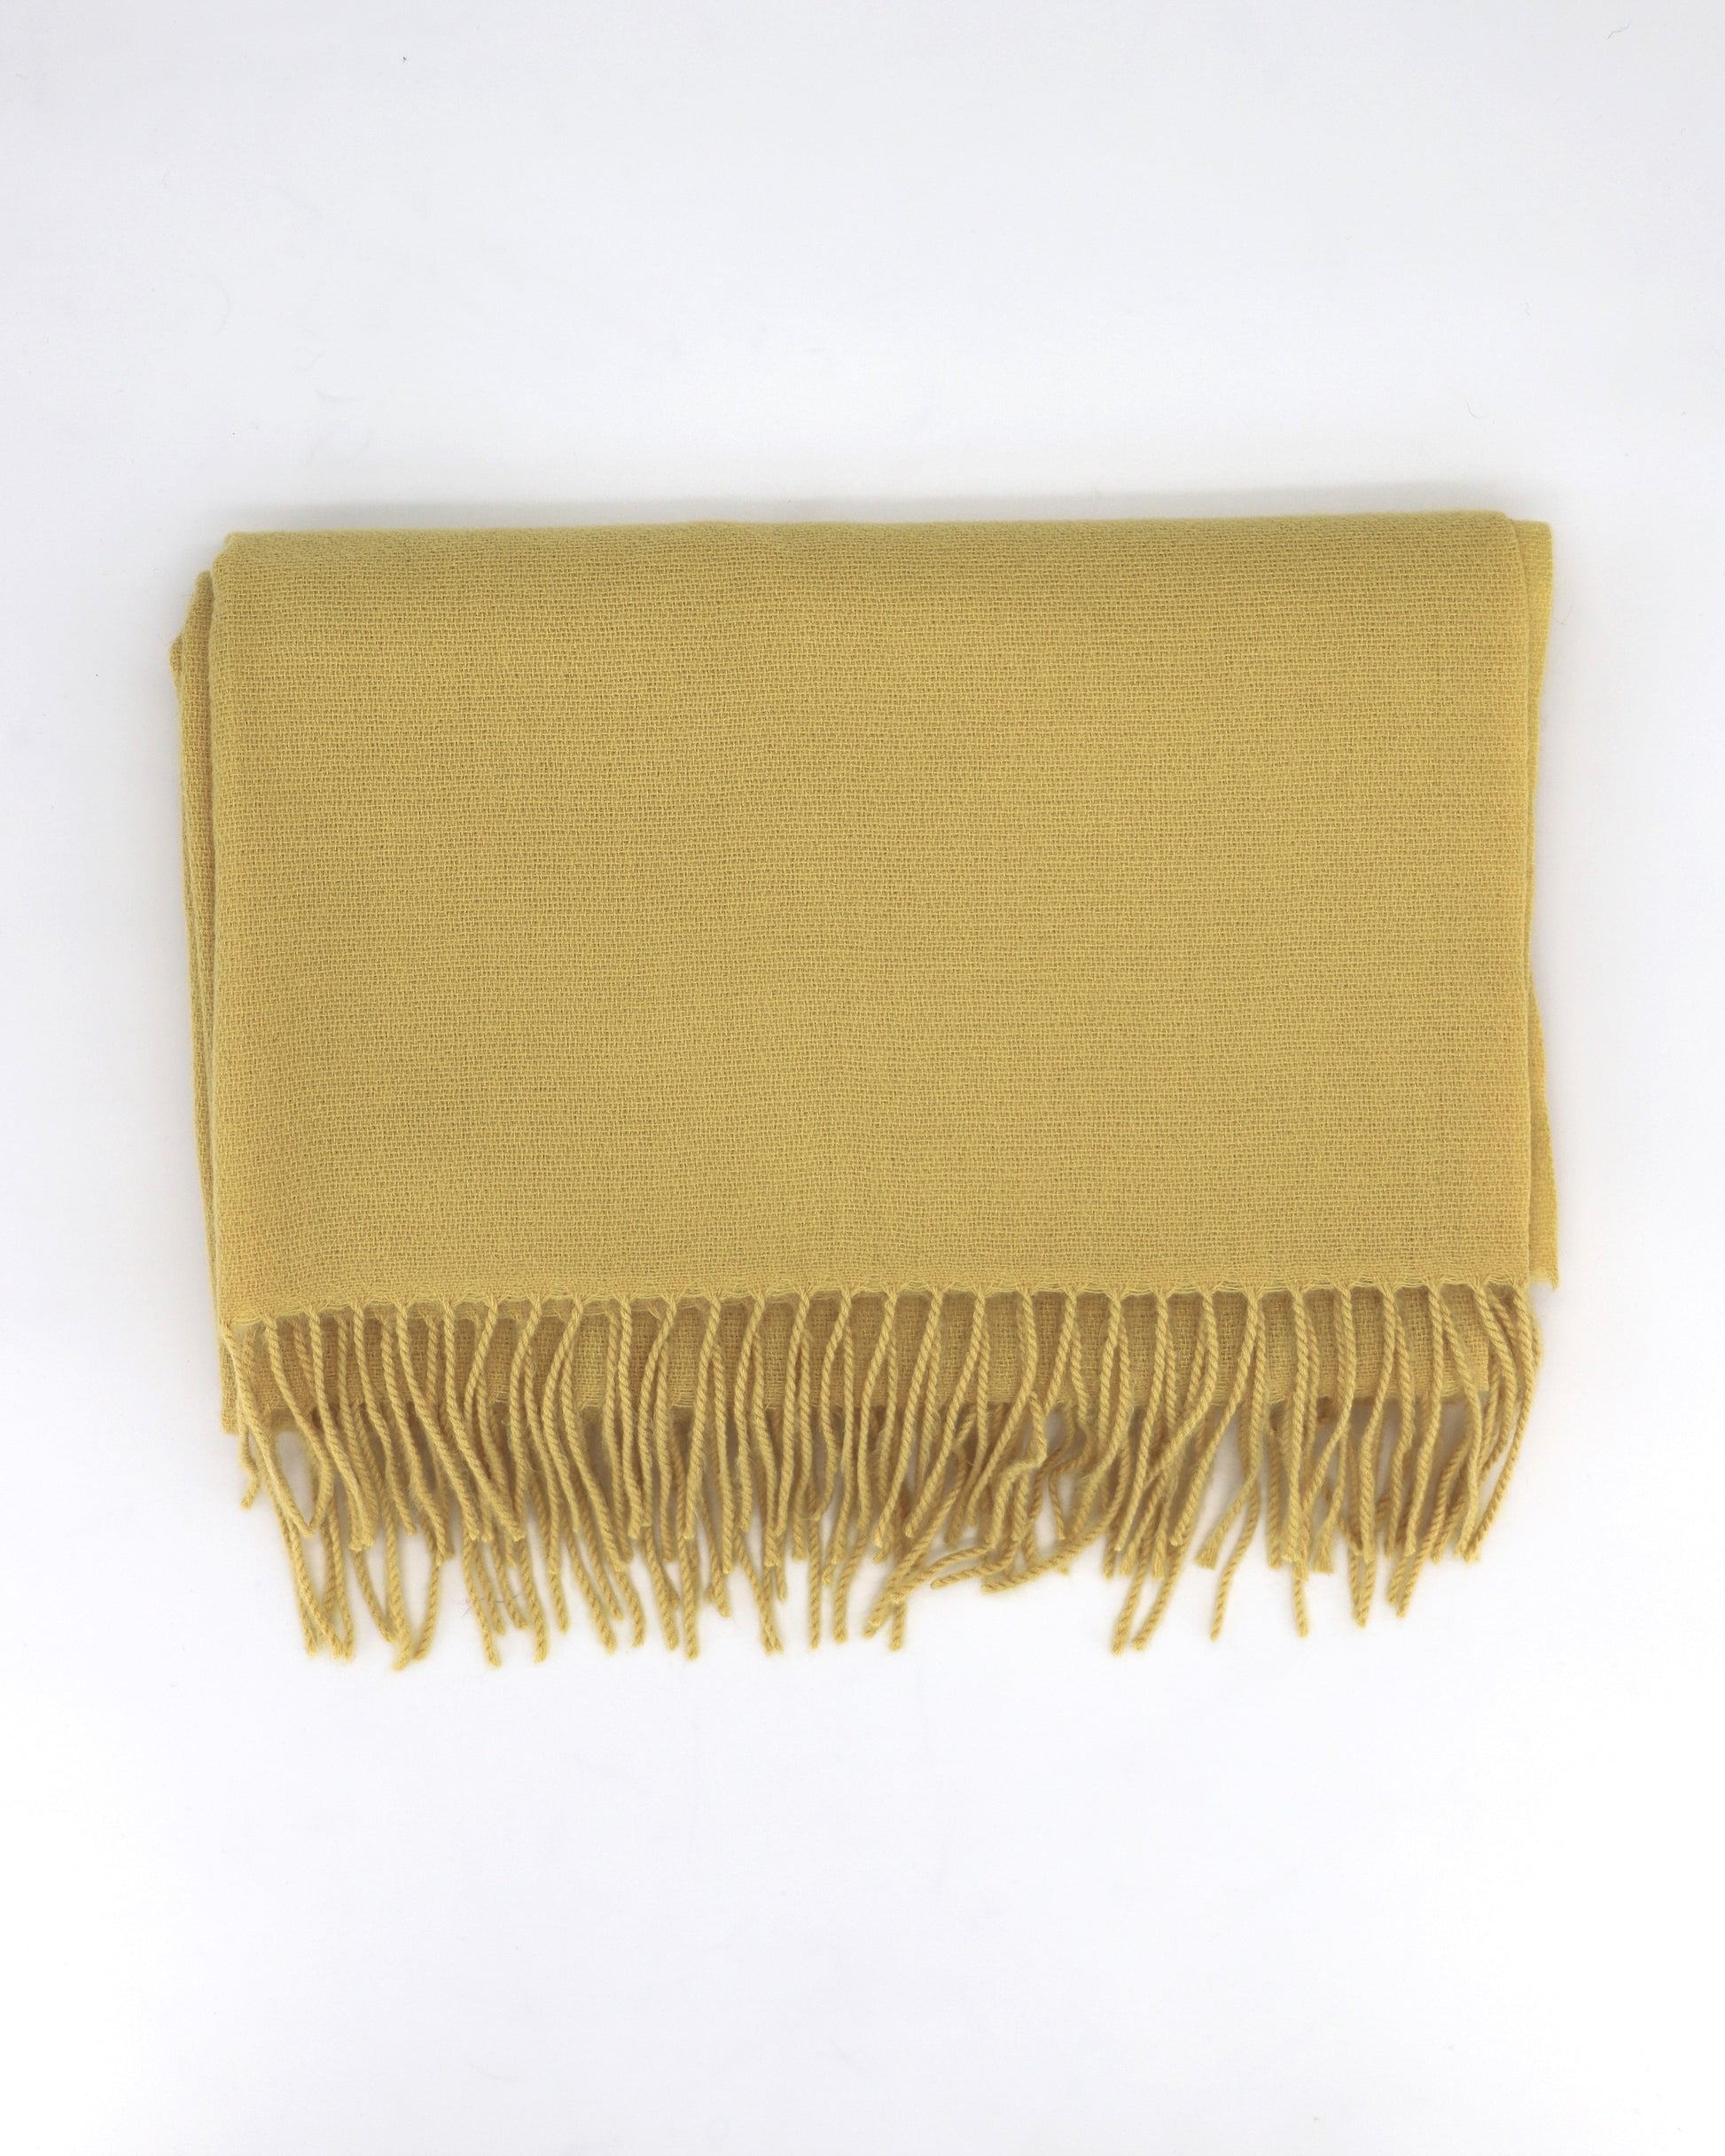 This Scarf is a finest XL-Size soft scarf from Villanelle. A luxurious accessory for women made from the softest wool and cashmere blend for extreme comfort and warmth. It is made in a trendy lemon yellow color for a great look and feeling. A cozy accessory for cold winter, autumn and spring days. This product is sourced and manufactured in Poland.